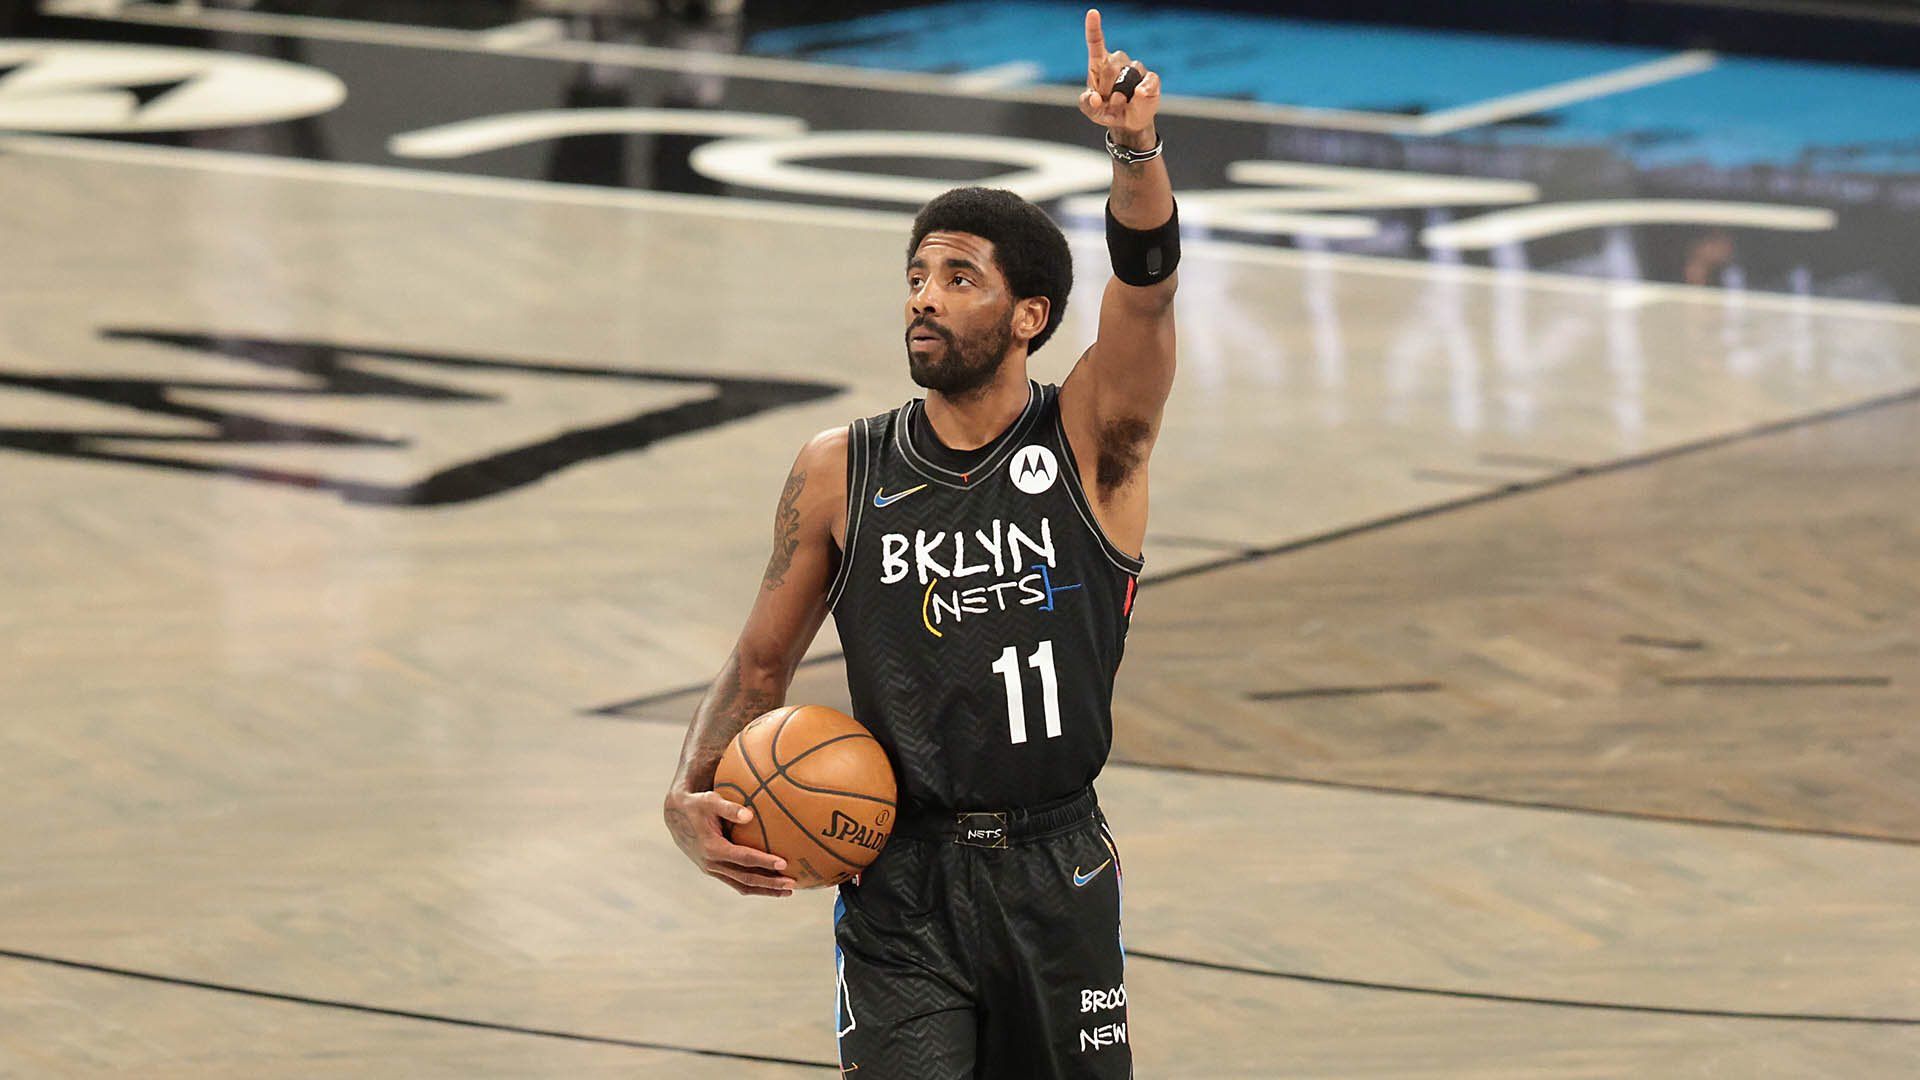 Kyrie Irving scores 50, Brooklyn Nets beat Charlotte Hornets to snap 4-game skid